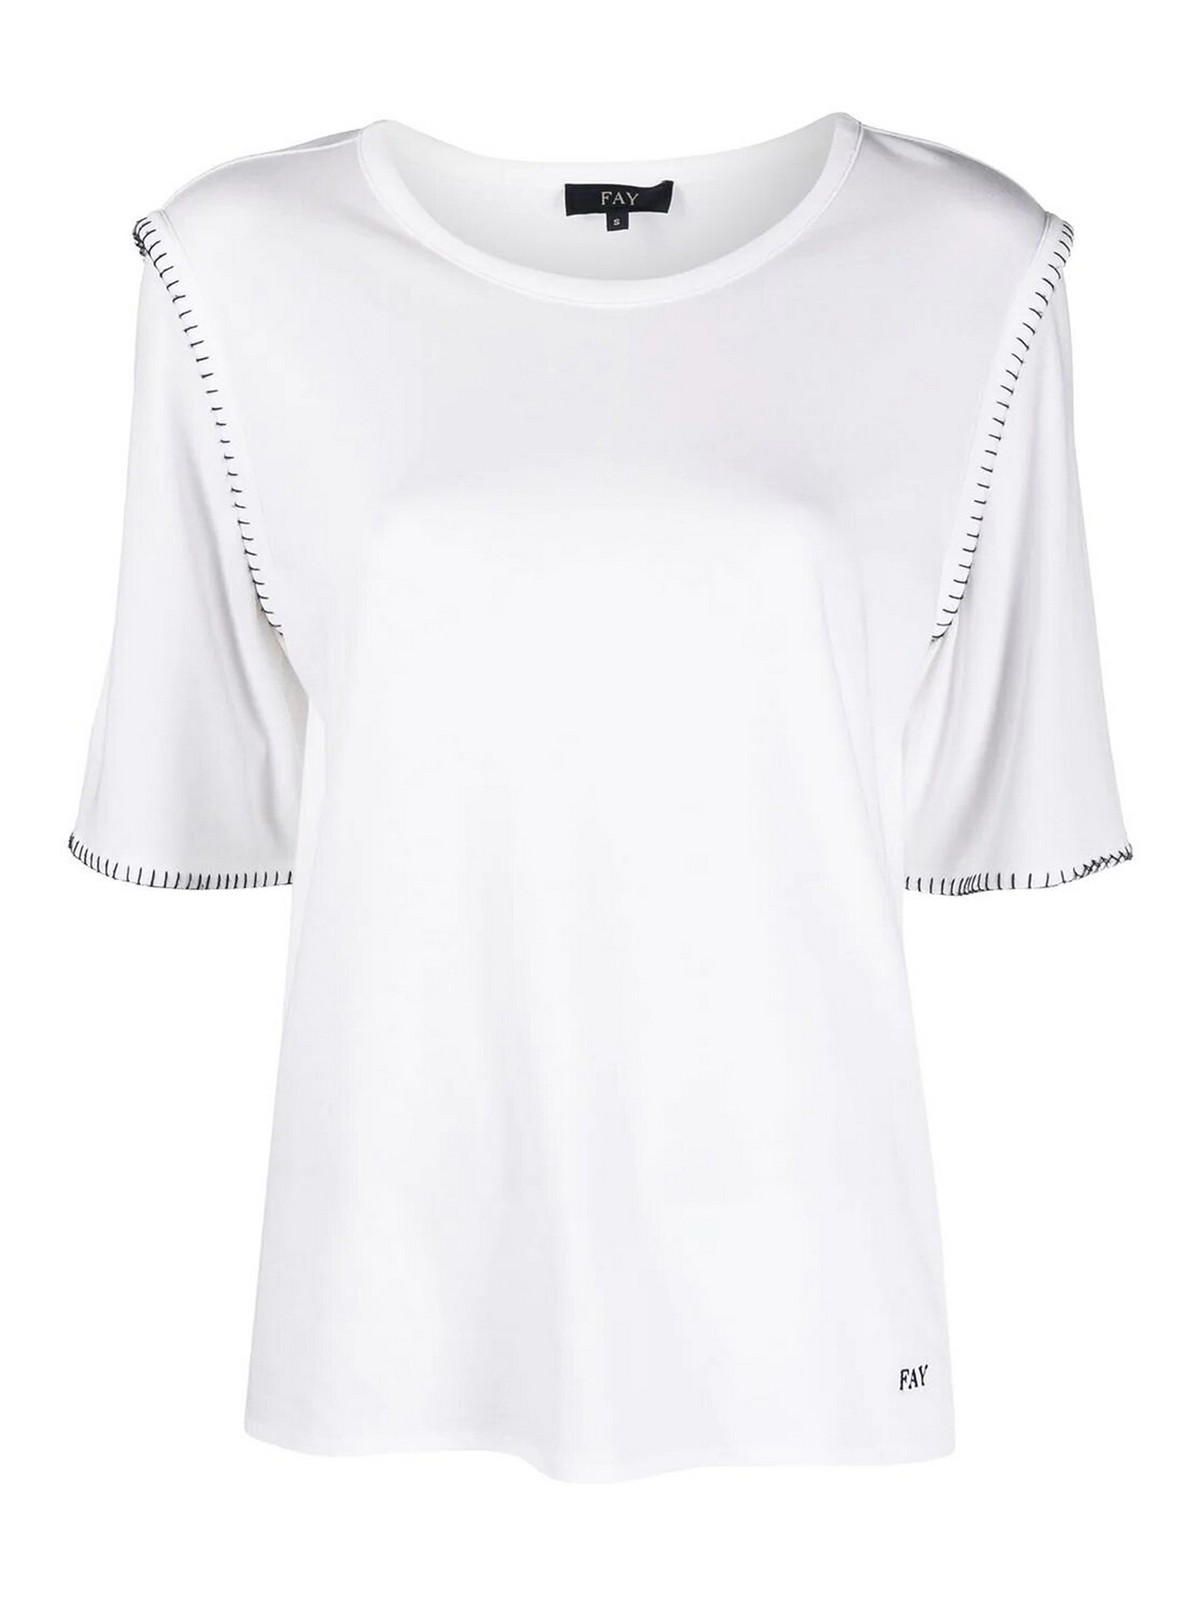 Fay Embroidered Tee In White